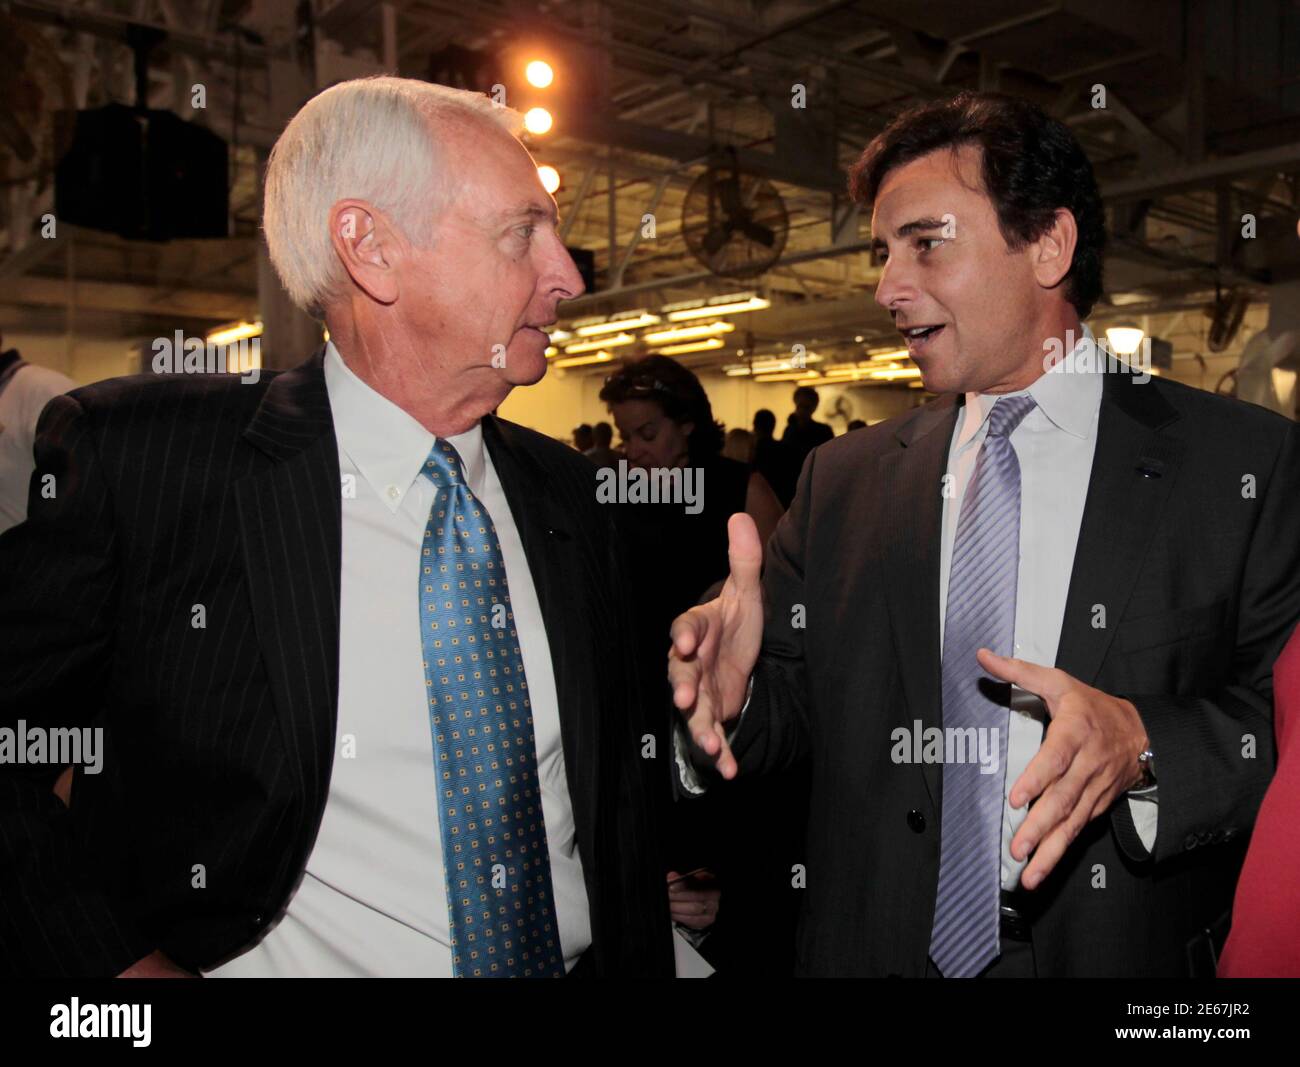 Kentucky Governor Steve Beshear (L) talks with Ford Motor Company's Mark Fields (R), Ford's president of the Americas, during a news conference to celebrate the start of production of Ford's new 2013 Ford Escape at the company's transformed Louisville Assembly Plant in Louisville, Kentucky, June 13, 2012.    REUTERS/John Sommers II      (UNITED STATES - Tags: BUSINESS TRANSPORT POLITICS) Stock Photo